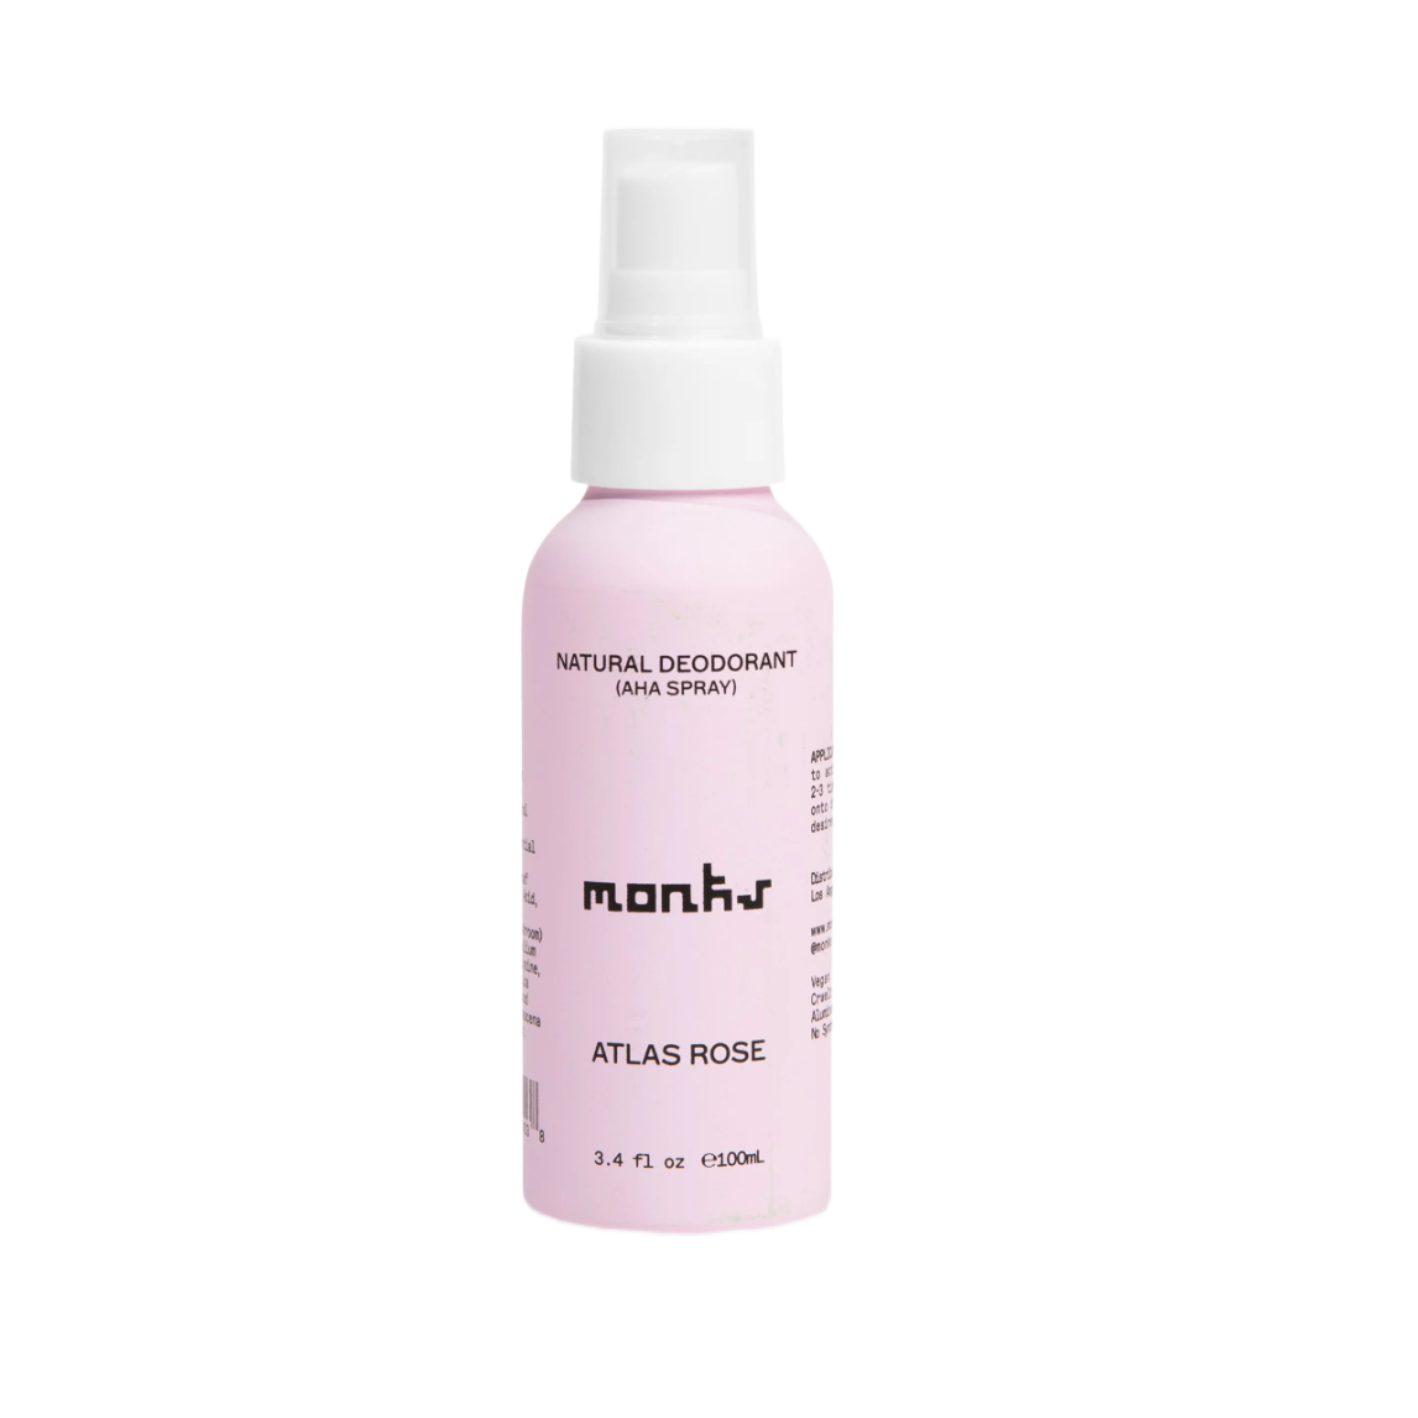 Monks Atlas Rose AHA Spray bottle, a natural deodorant with Damask Rose and Atlas Cedar, enriched with AHA and probiotics for skin health